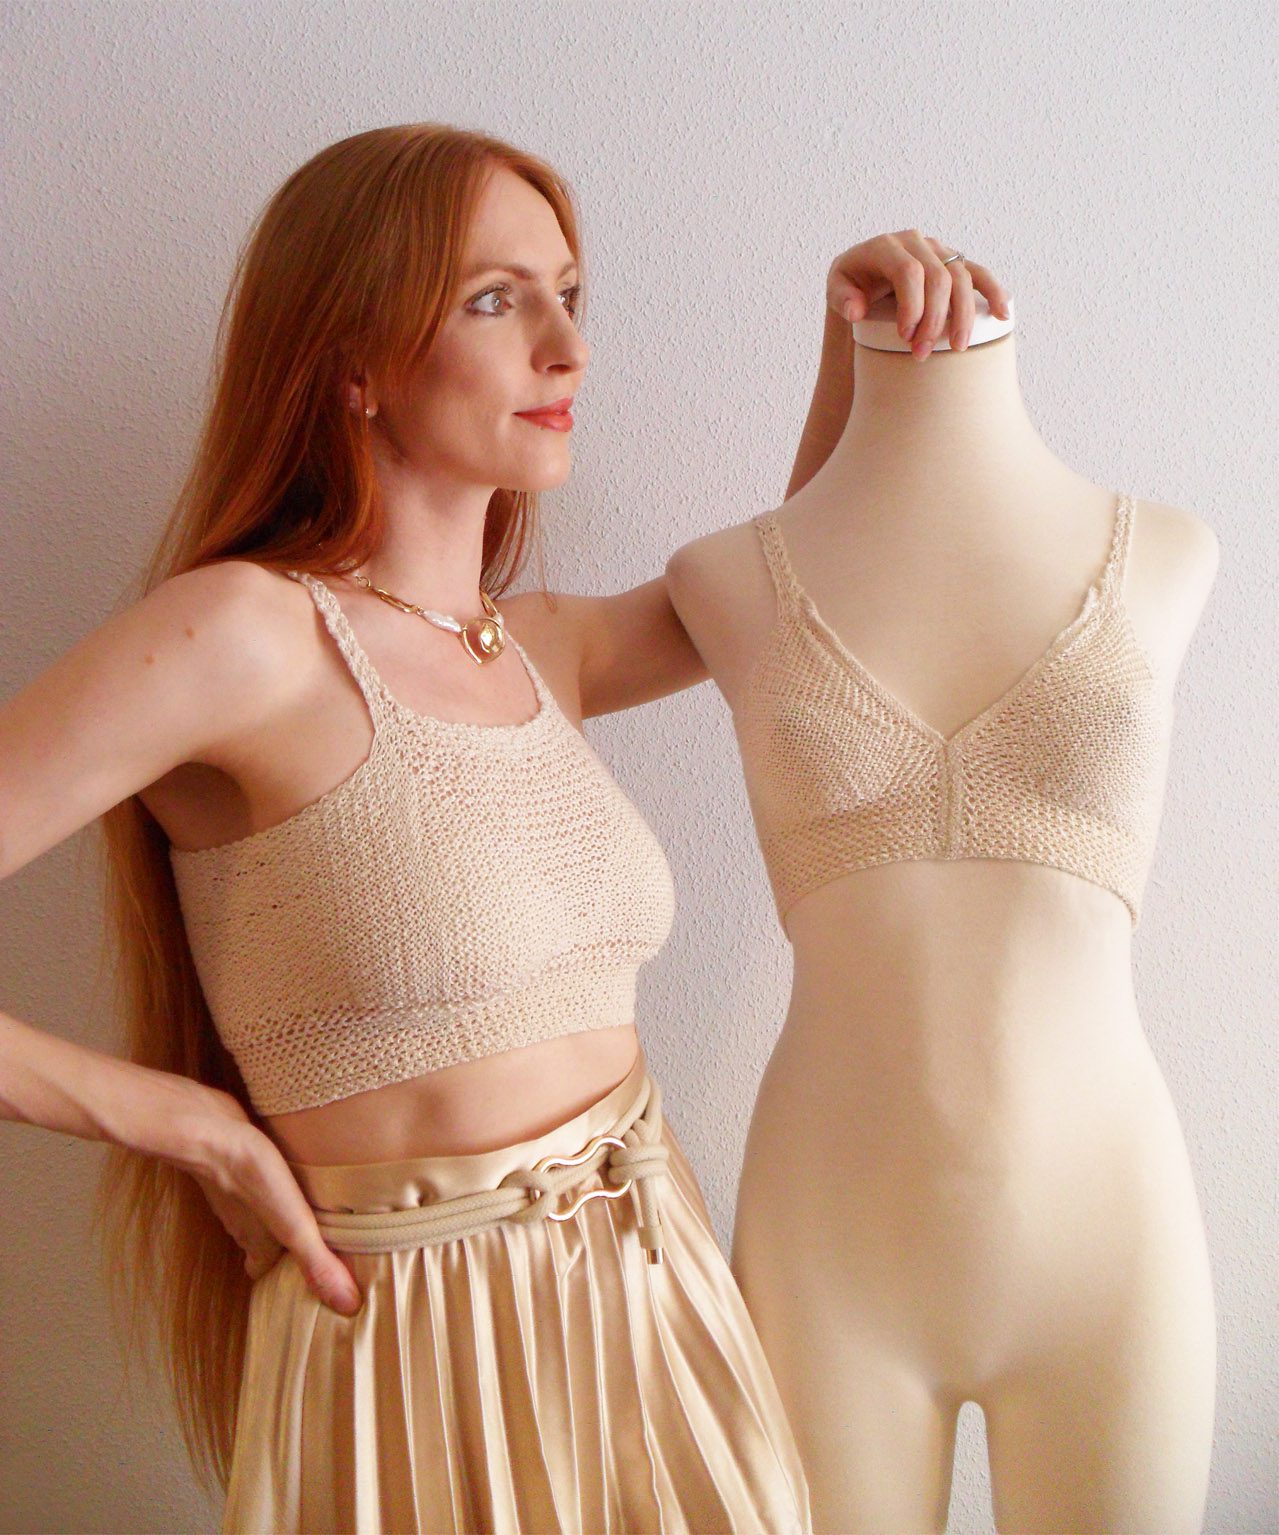 Tensengral: (Almost) Zero-Waste Bras in Supportive Braided Lace